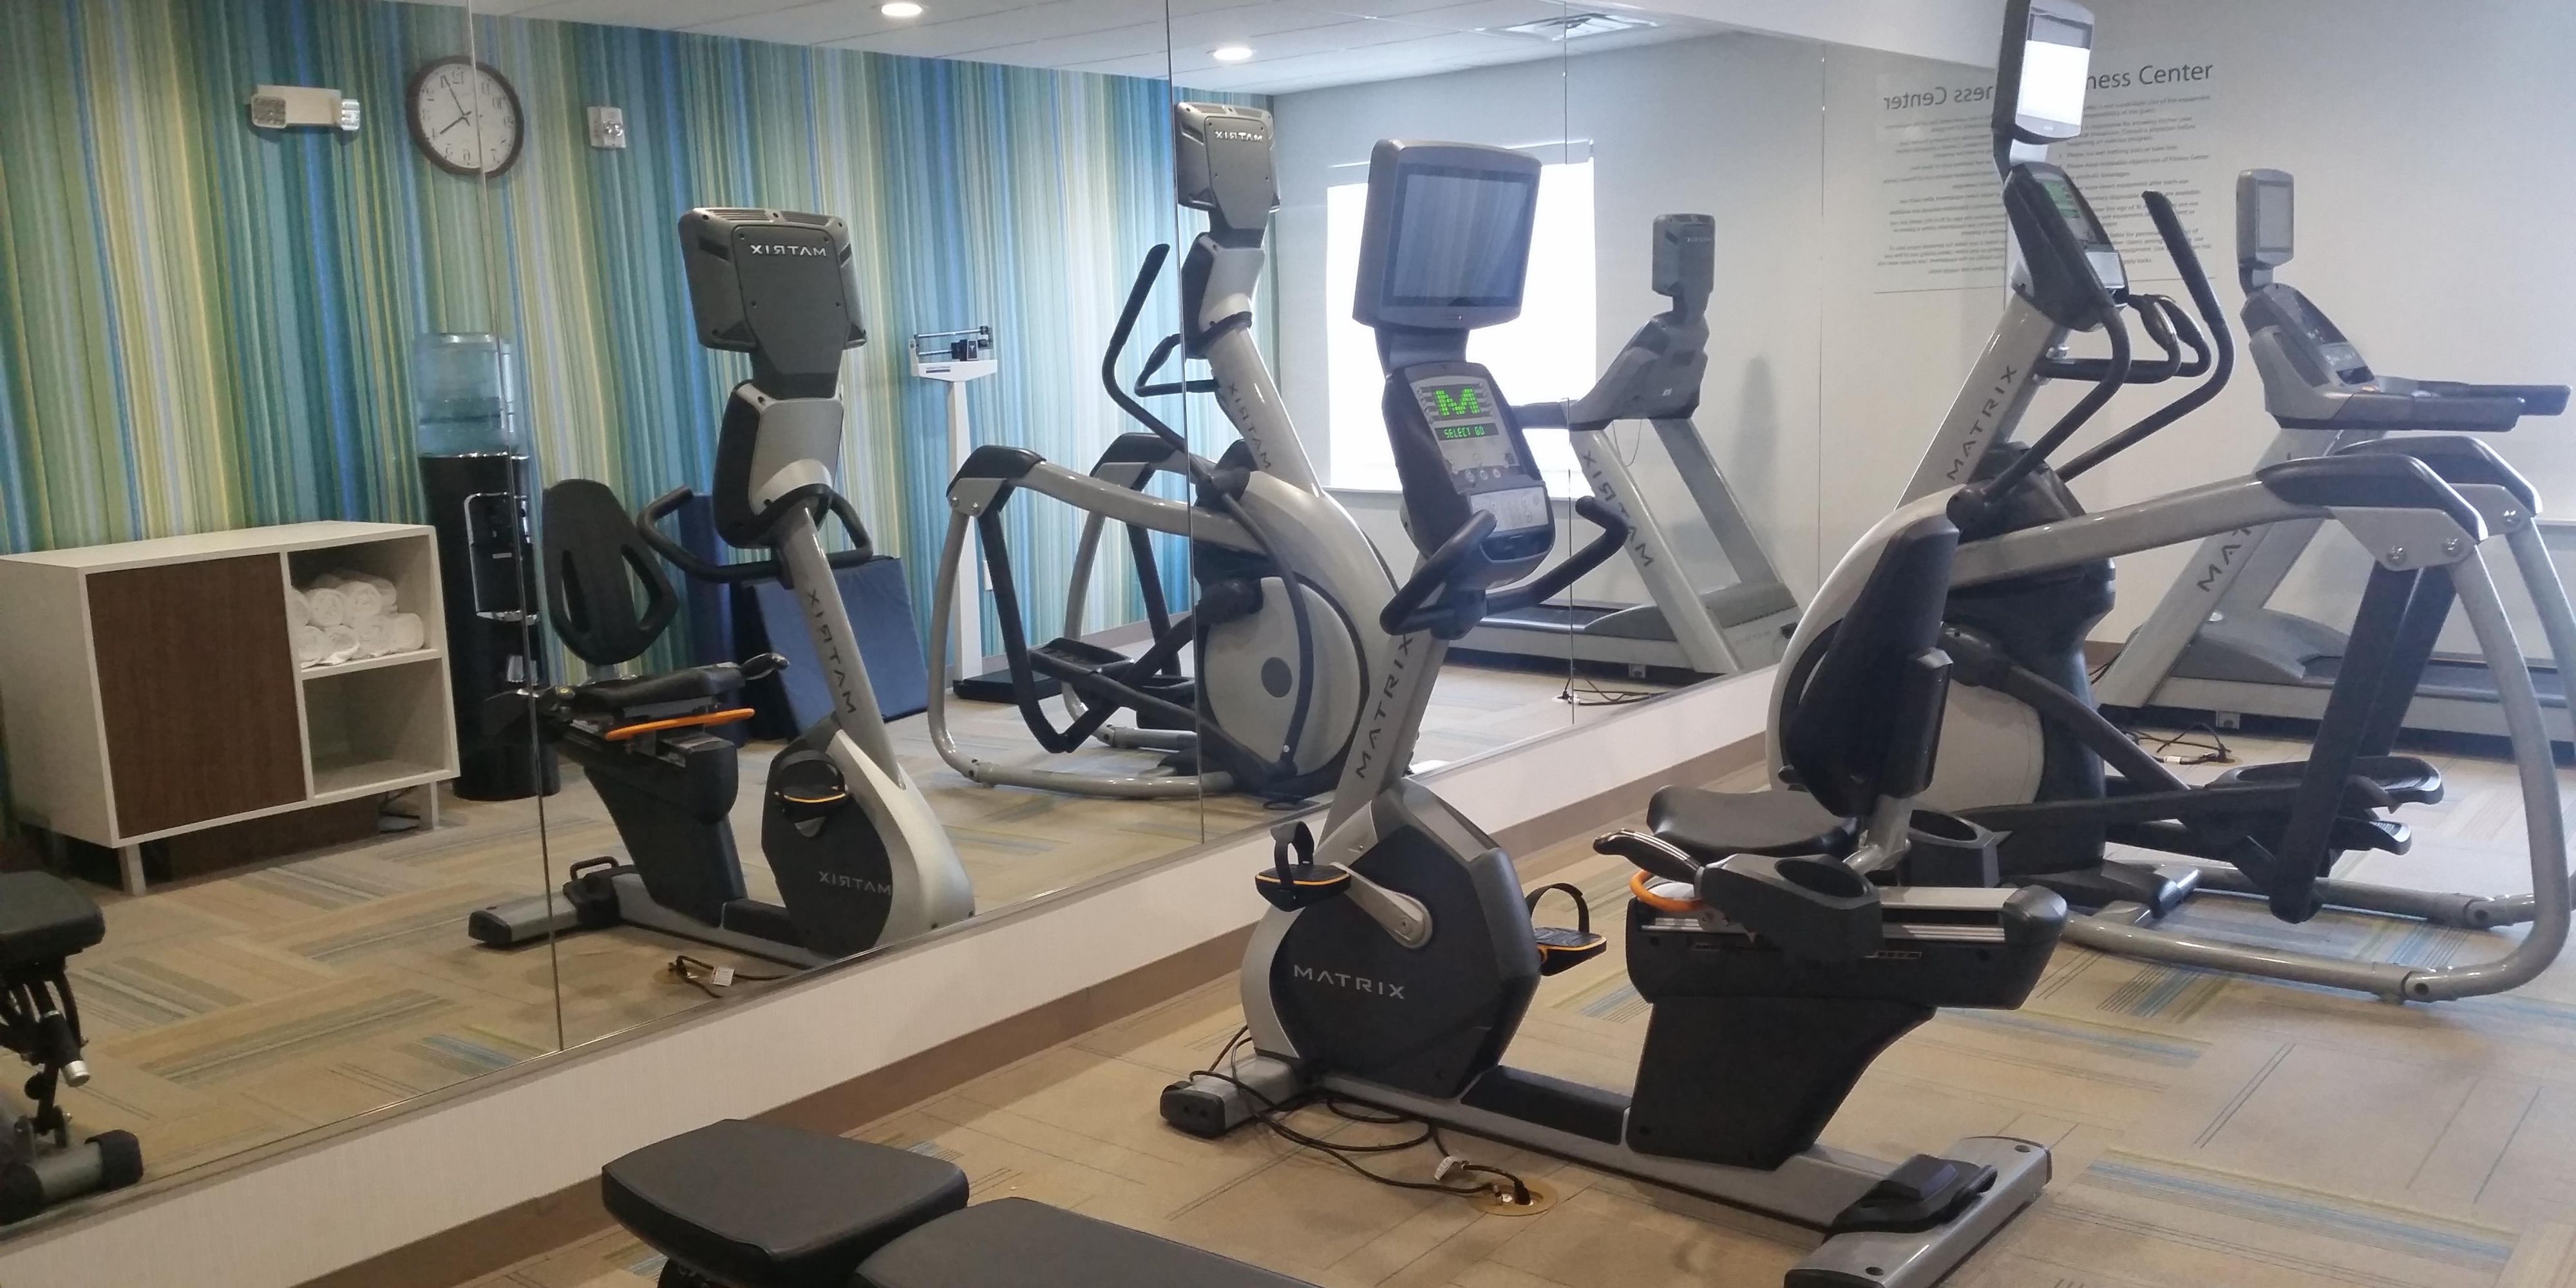 Stay active during your time at the Holiday Inn Express Slidell in our Fitness Center. We feature equipment such as free weights, stationary bike, treadmill, balance ball, elliptical to name a few. Our Fitness Center is open 24-hours 7 days a week for your convenience. Complimentary water & towels. Watch your favorite show while you work out!